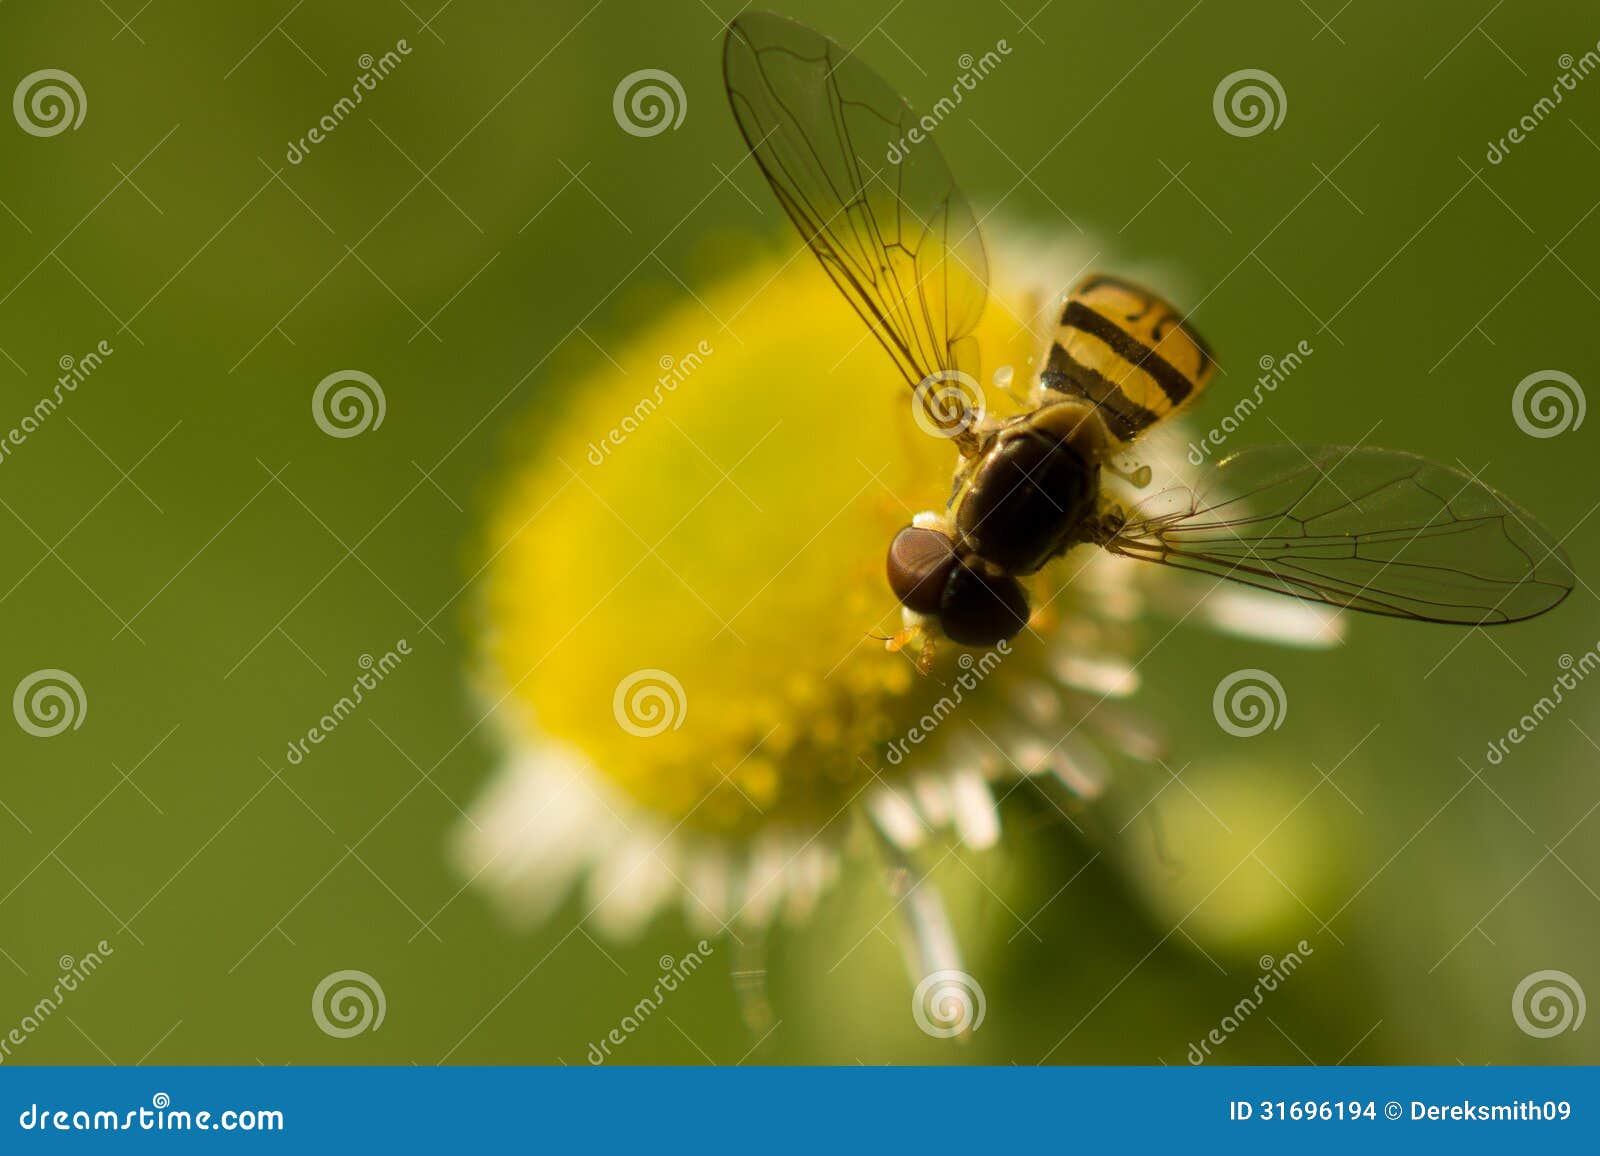 hover fly pollinating